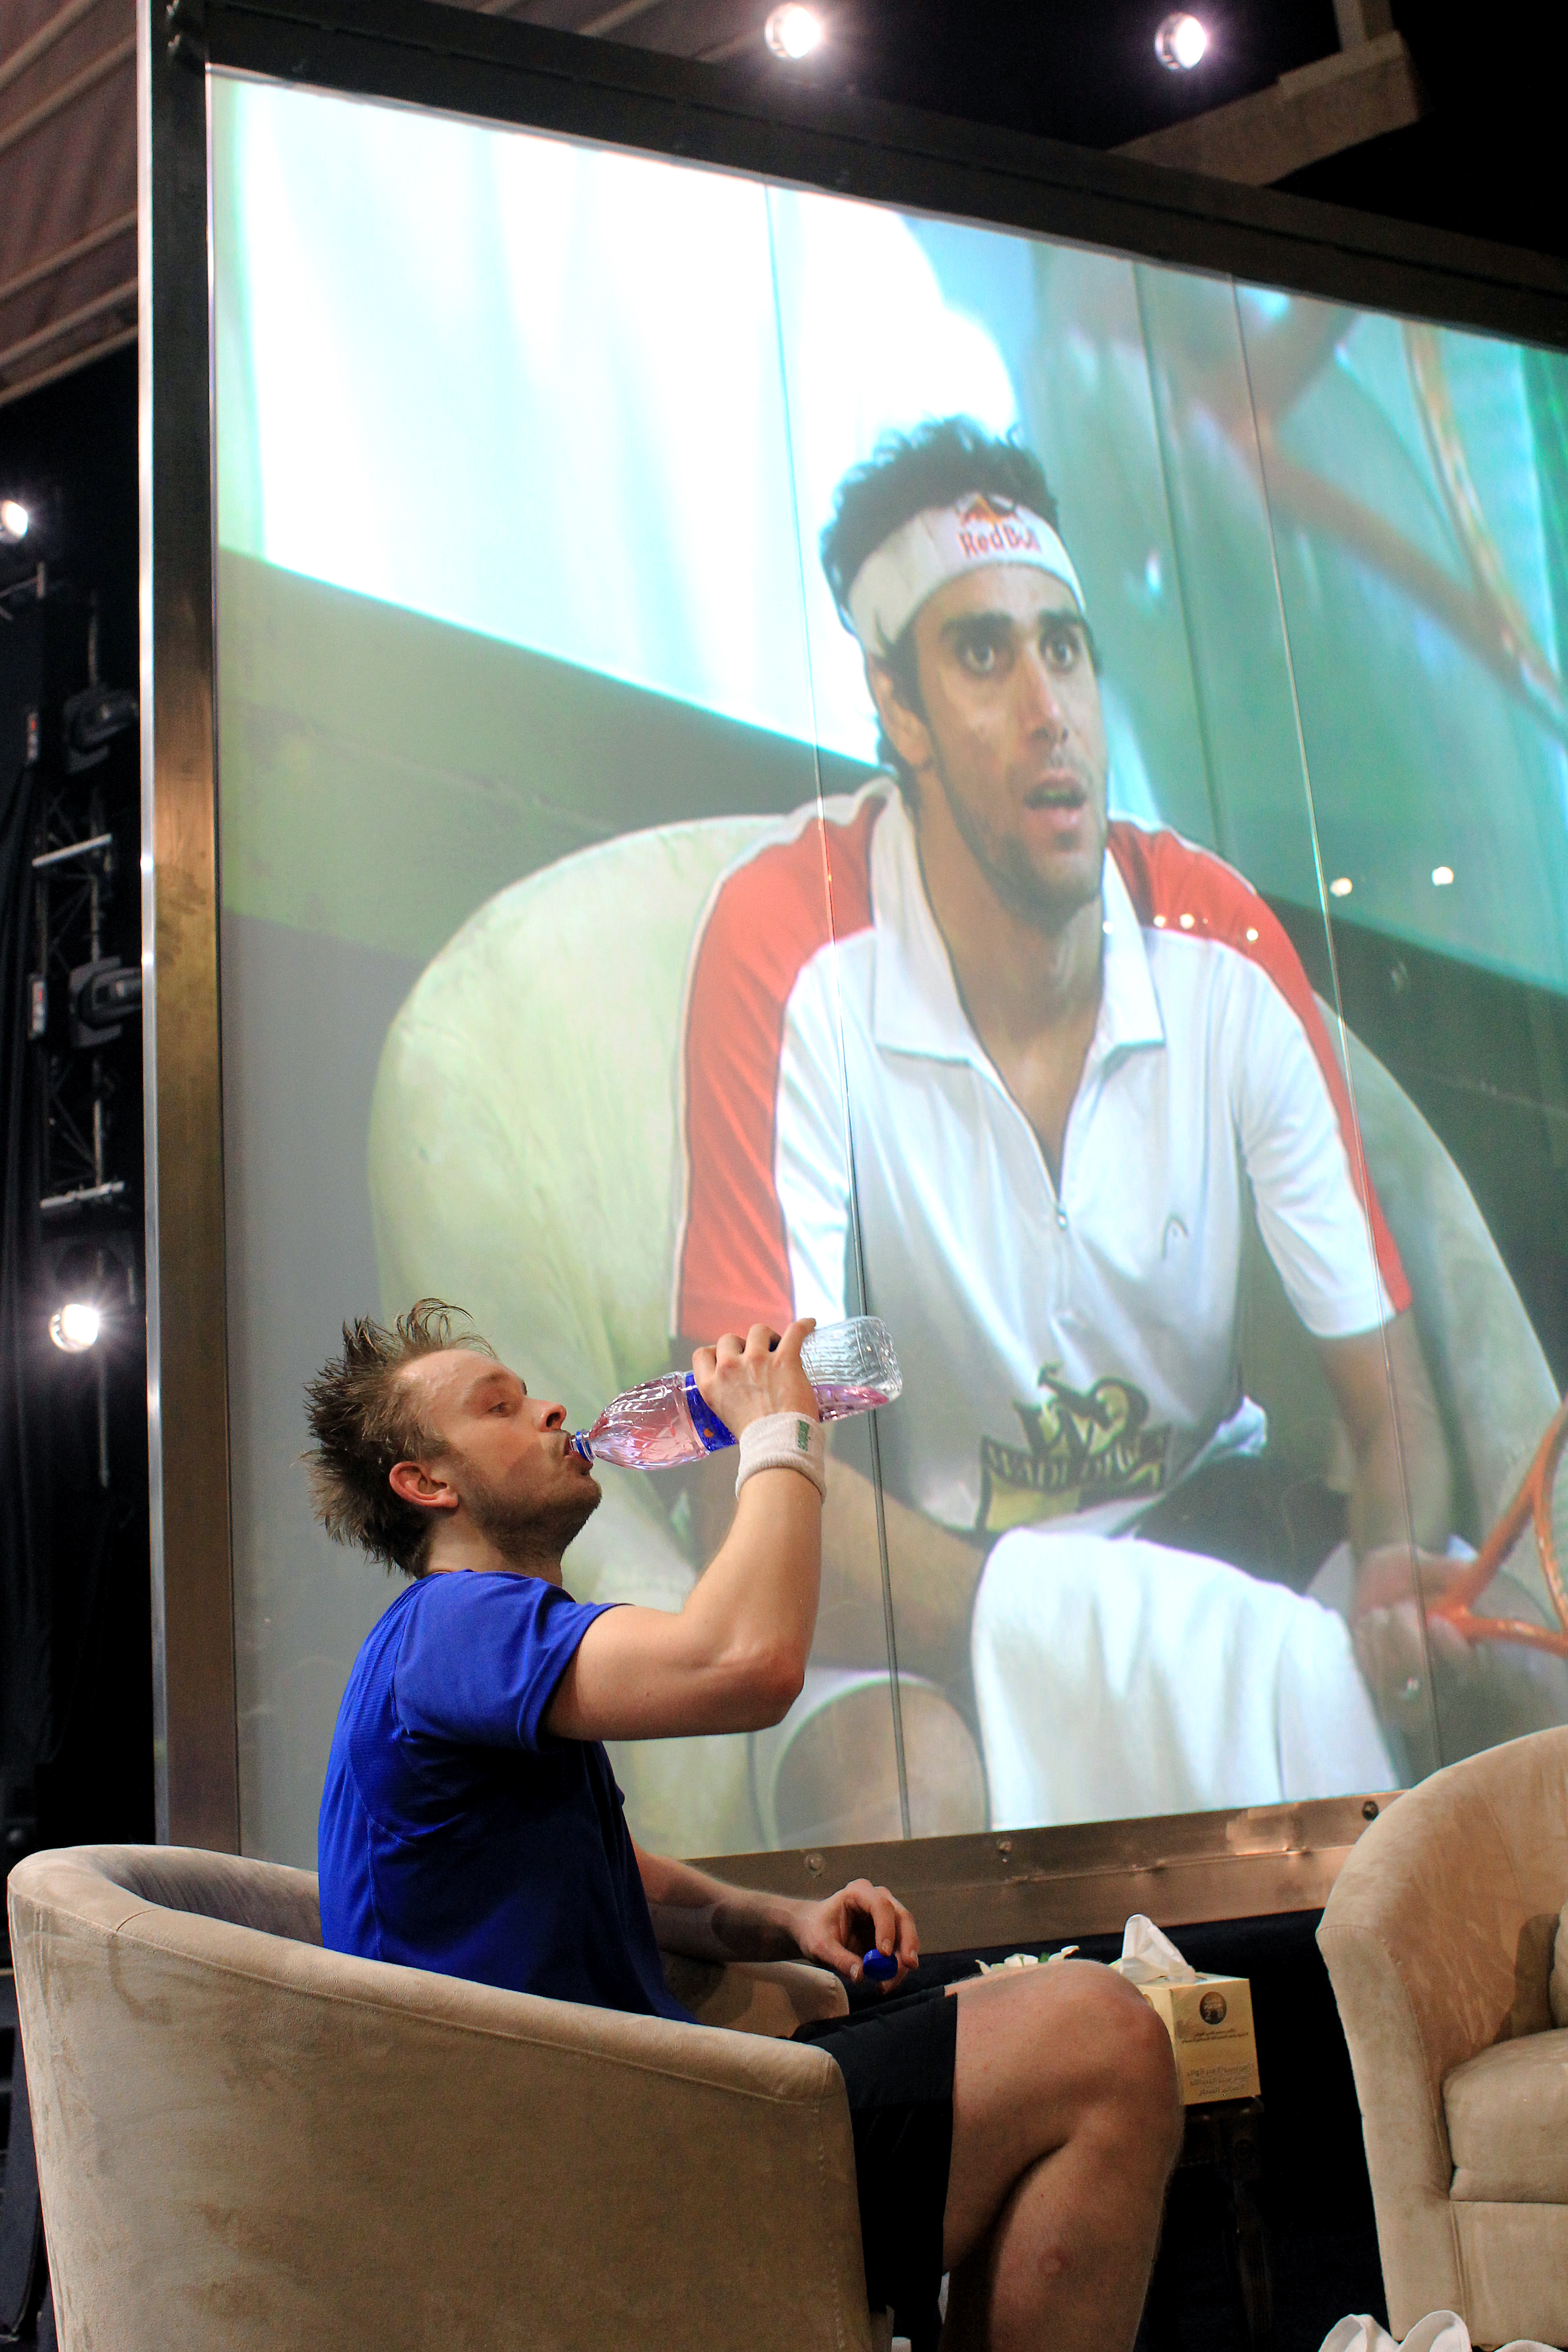 With all the trappings of a world class event, James Willstrop gathers himself between games in comfy lounge chairs, with giant screens on either side of the court catching Karim Darwish doing the same. 